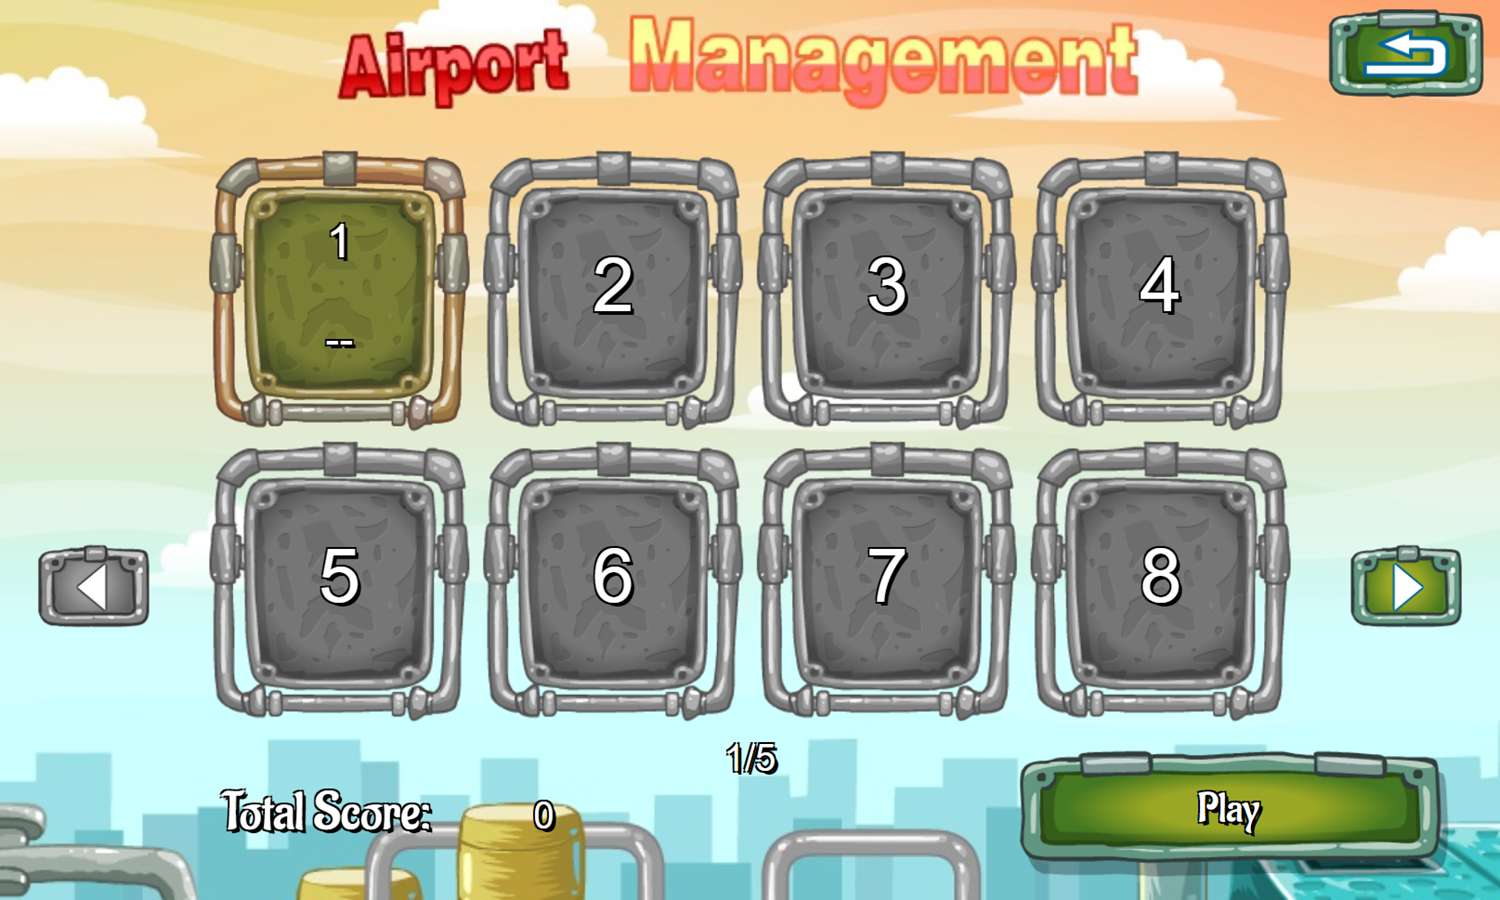 Airport Management 3 Game Stage Select Screenshot.